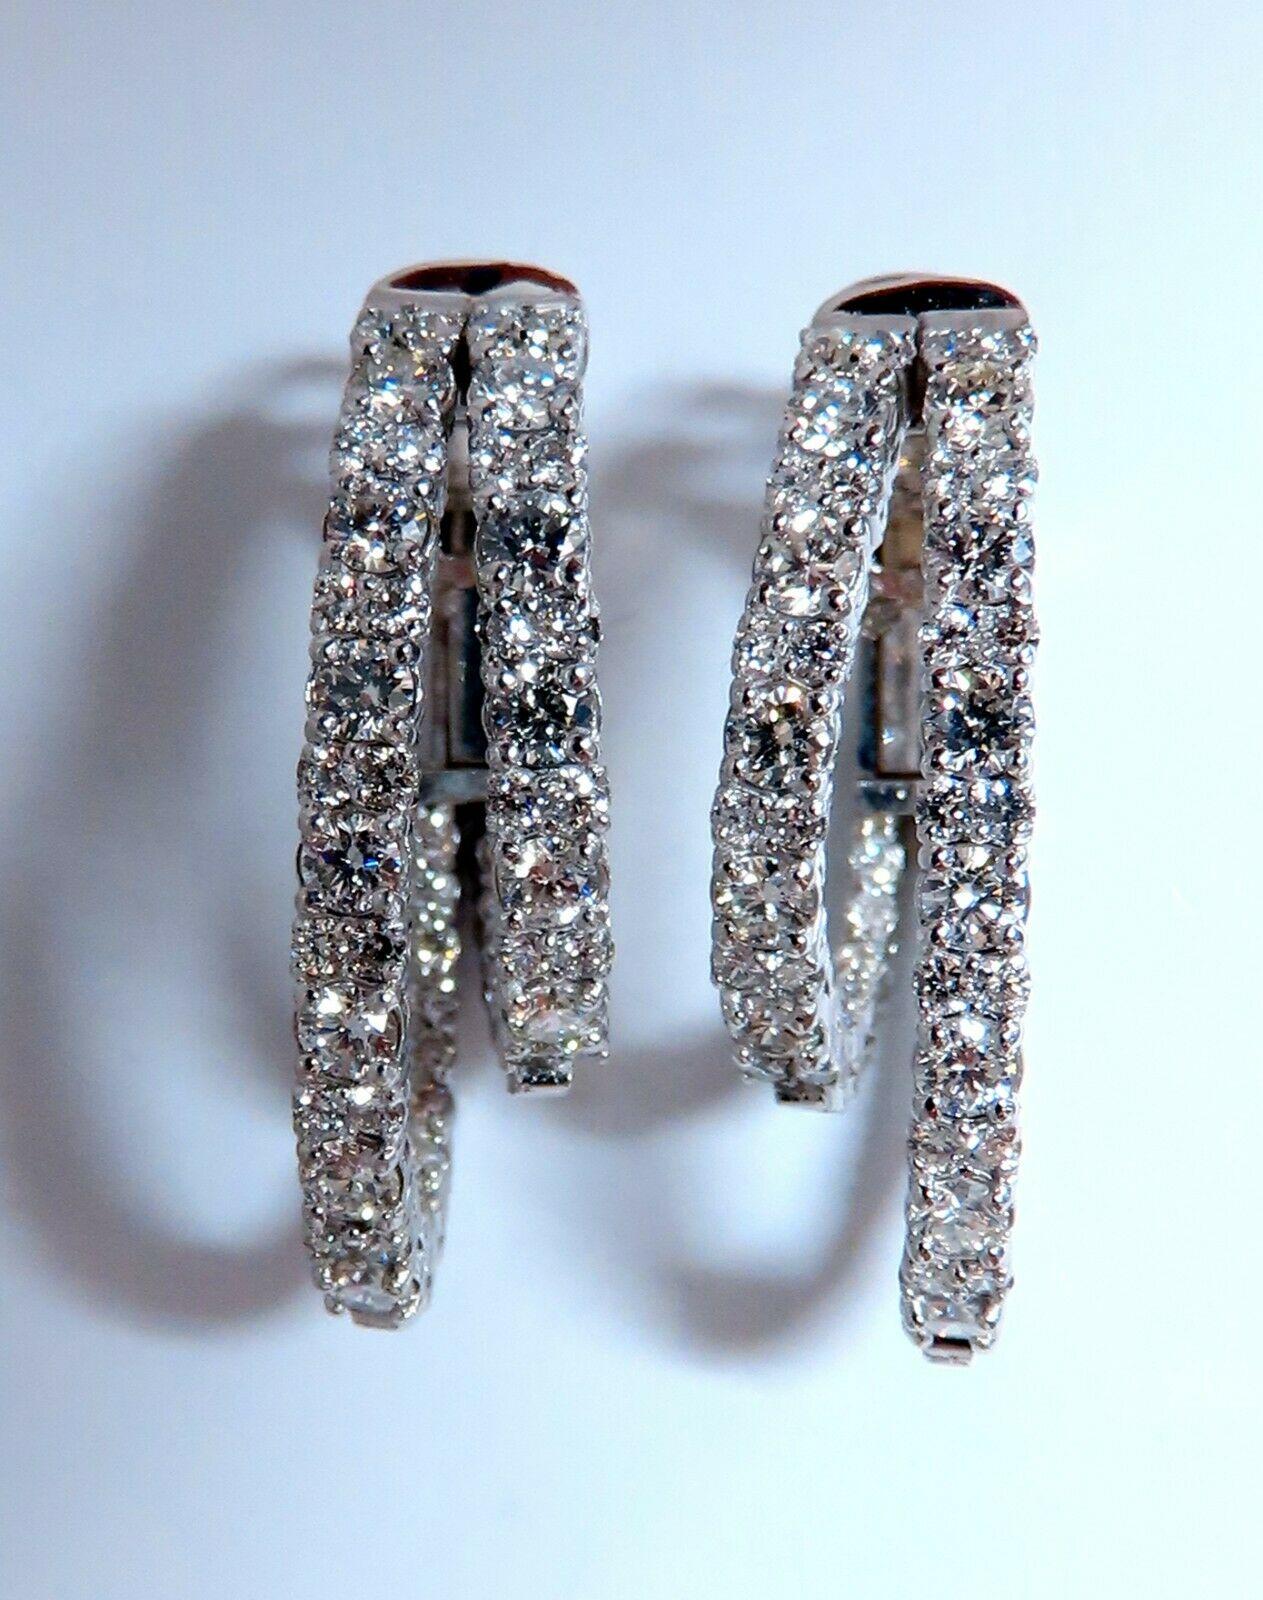 Inside Out, Double Hoop Earrings

2.34ct. Natural diamonds  

Rounds, Full cut brilliants.

G- color Vs-2 Clarity. 

Excellent detail.

14kt. white gold

8.7 grams

1.08 inch long

Lever Closure

$9000 Appraisal Certificate will accompany.